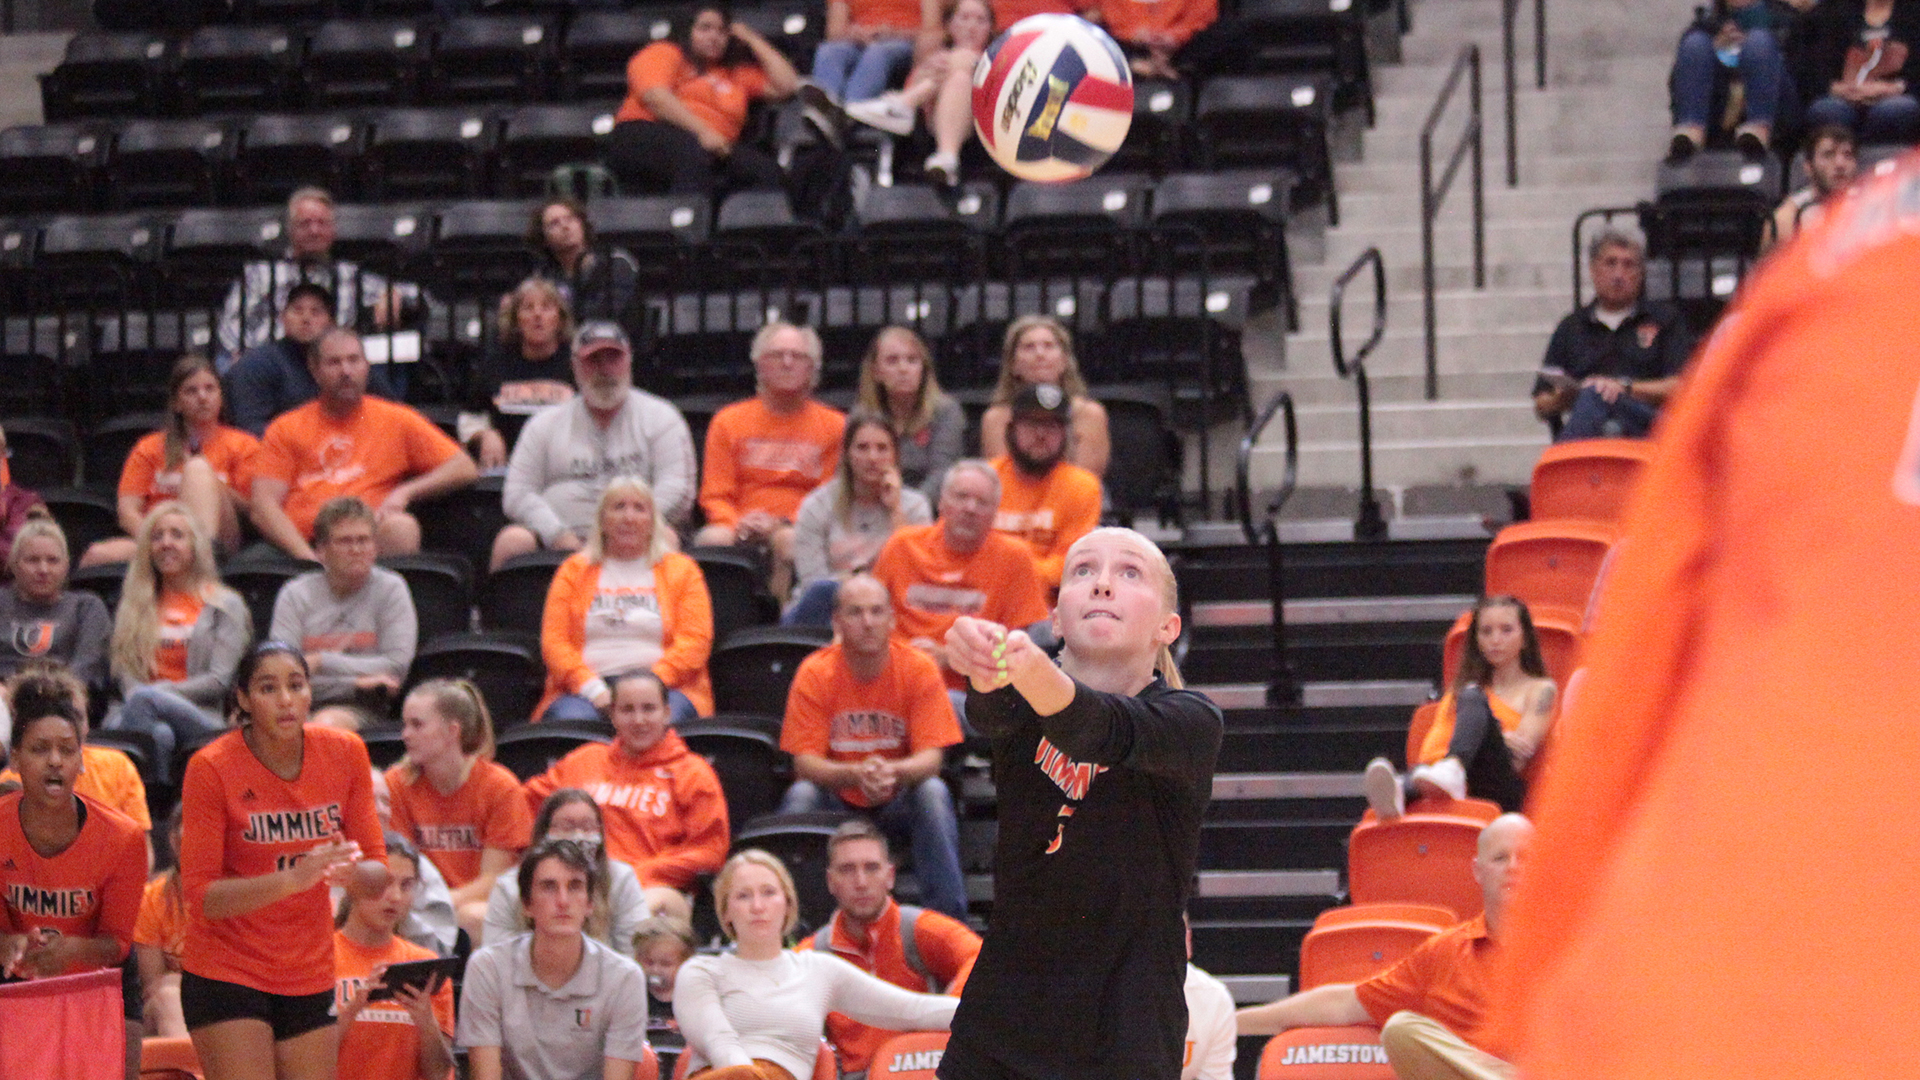 Jimmies sweep pair of Saturday matches at Big Sky Volleyball Challenge